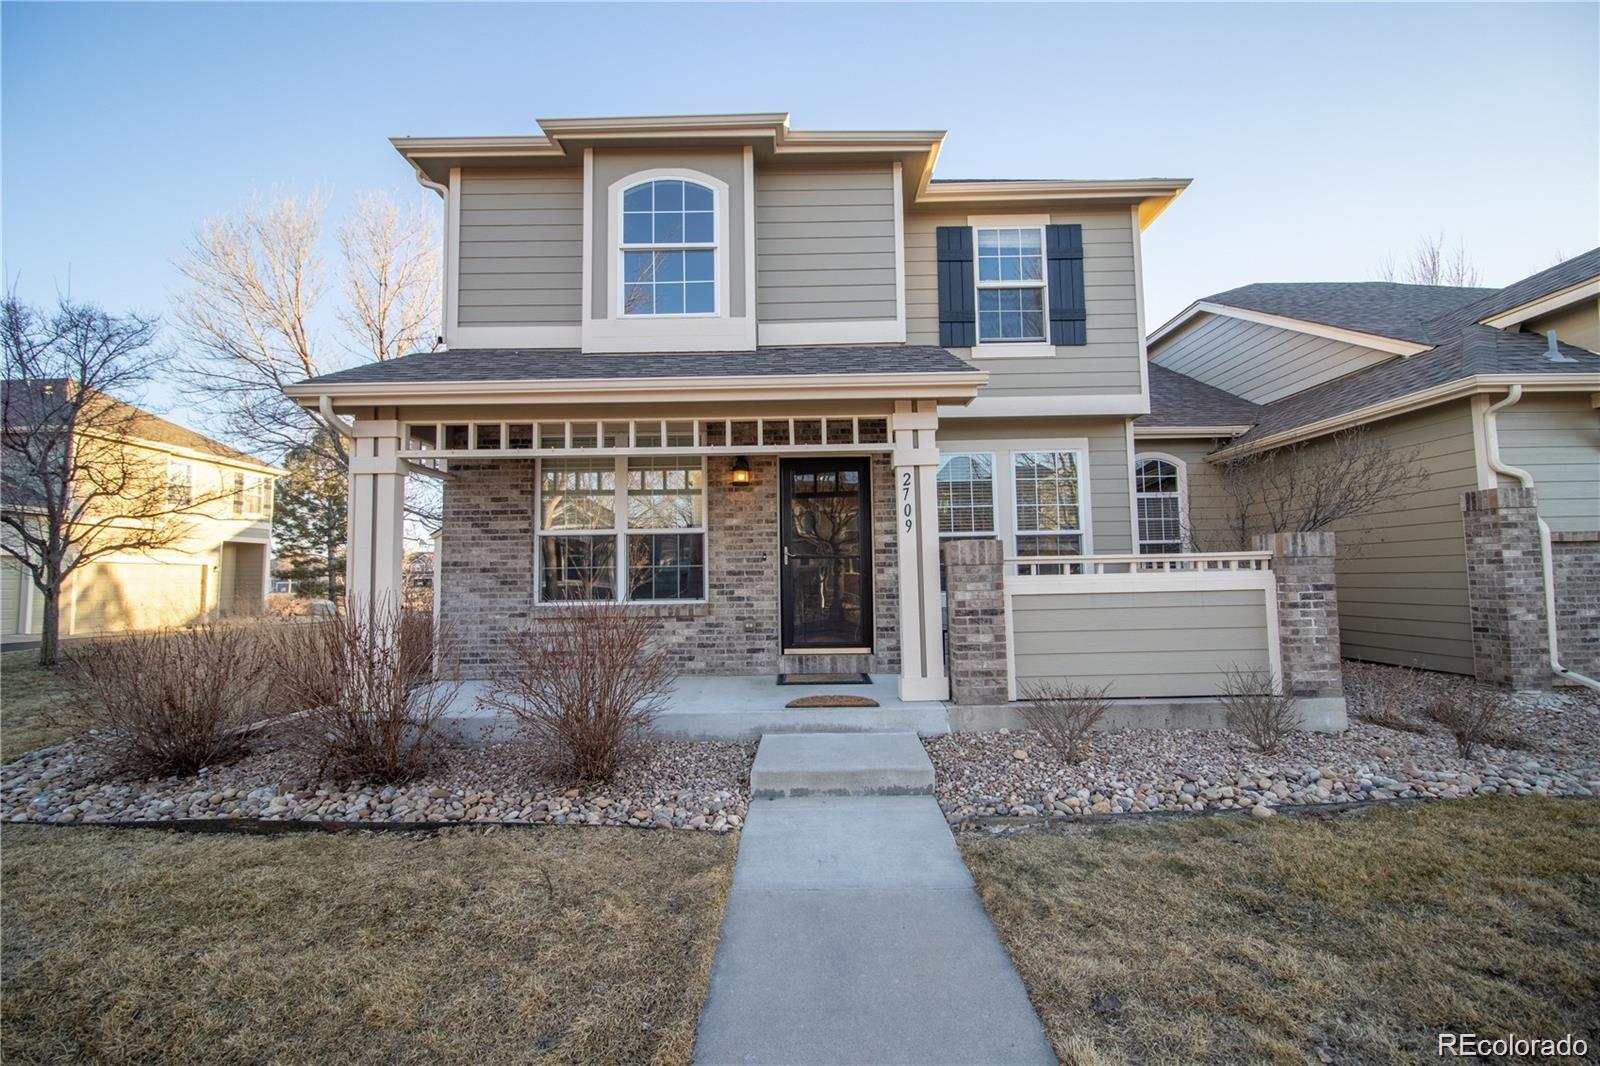 2709  County Fair Ln , fort collins MLS: 2590624 Beds: 4 Baths: 4 Price: $550,000